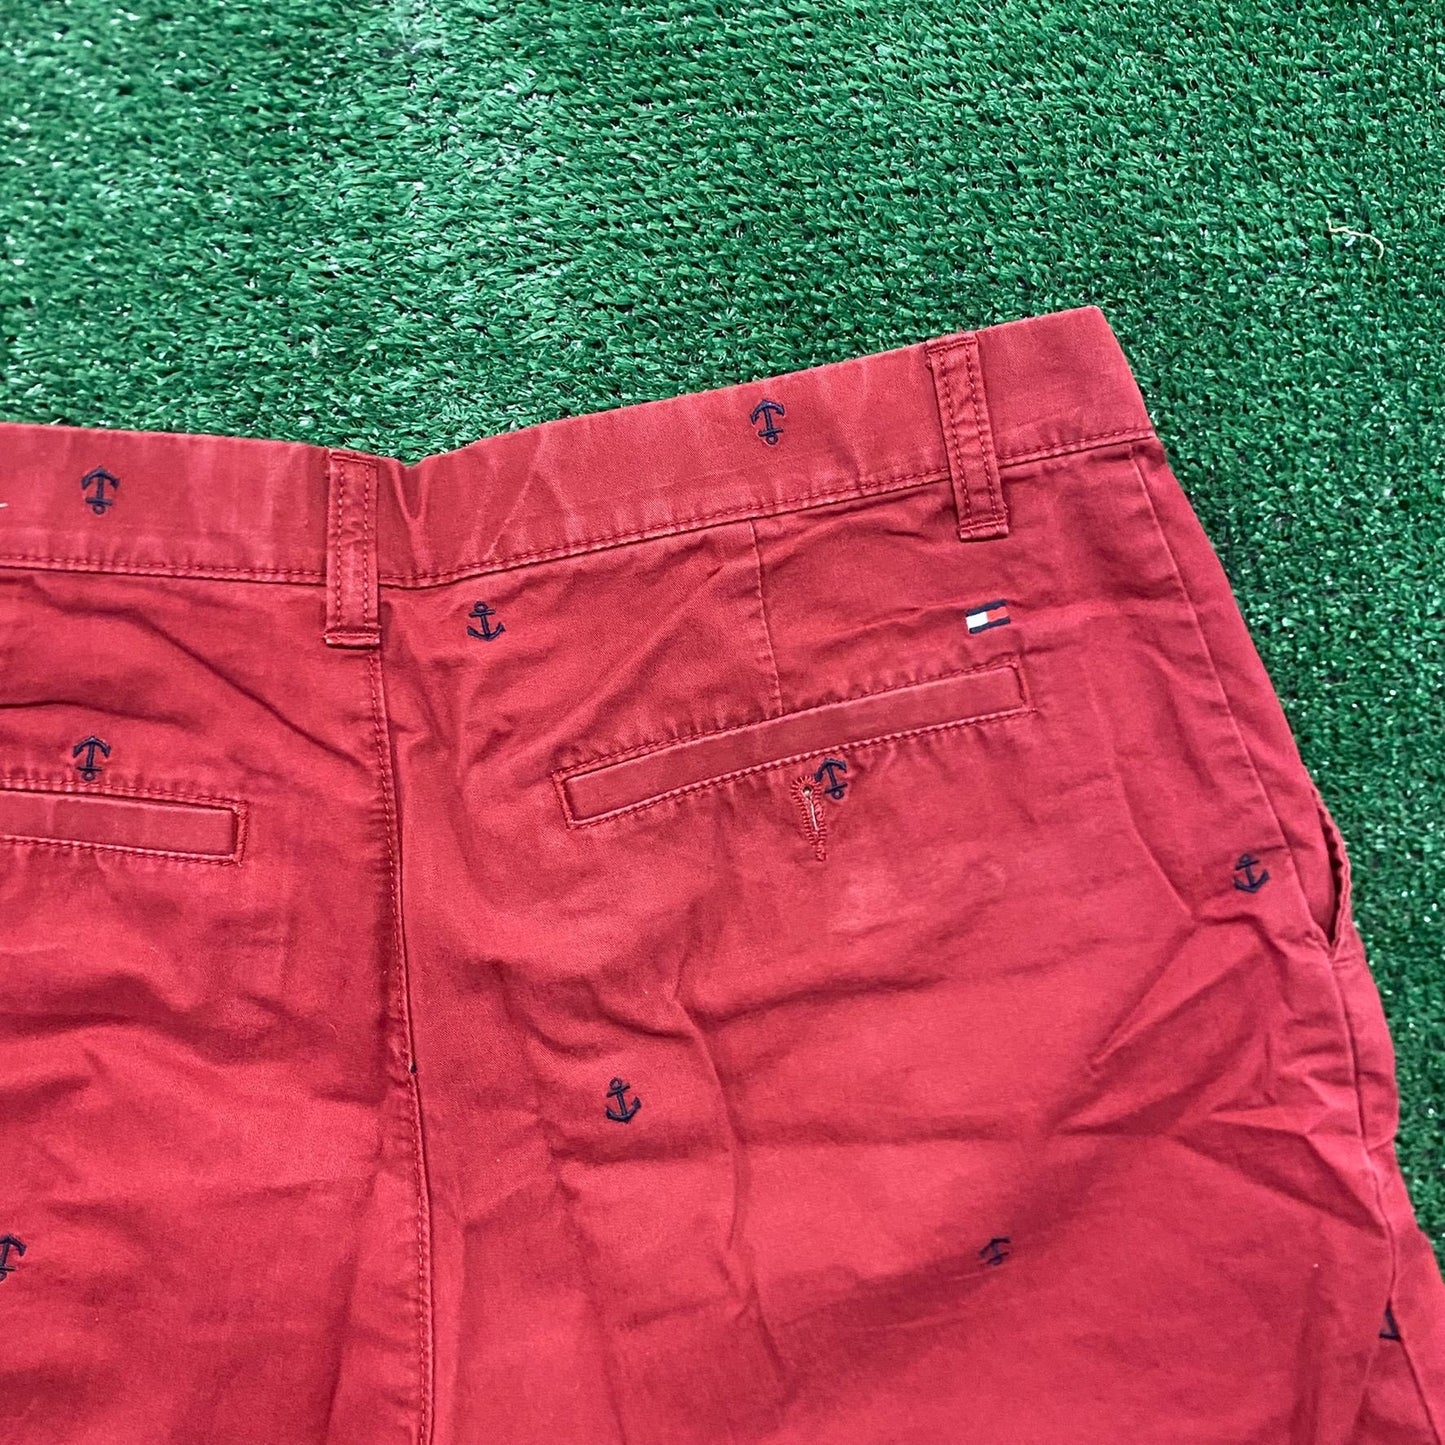 Tommy Hilfiger Nautical Anchors Vintage Preppy Chino Shorts